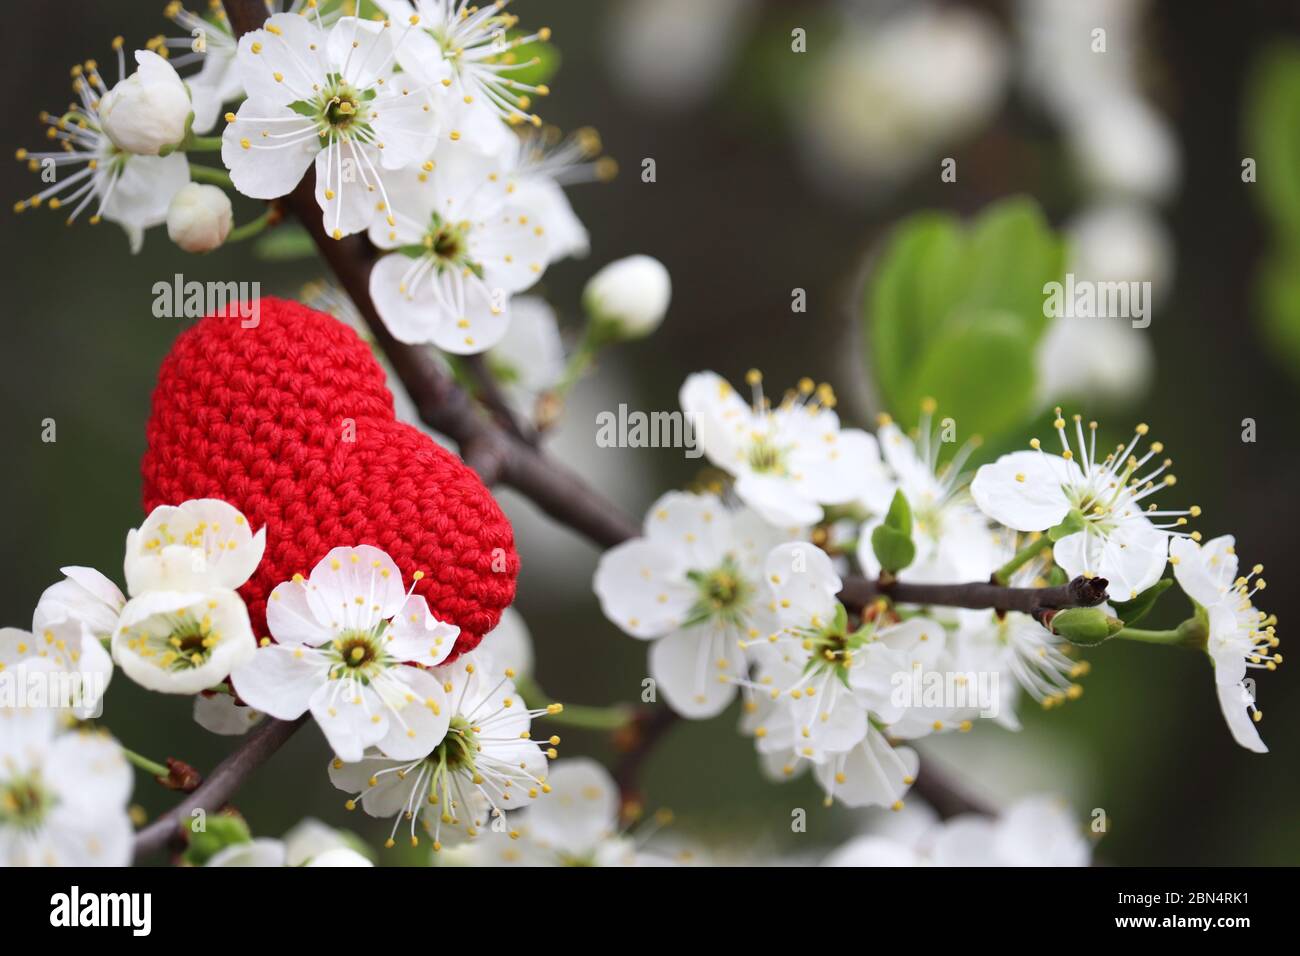 Love heart, cherry blossom in spring, selective focus. White flowers and red knitted heart shape on a branch in a garden Stock Photo